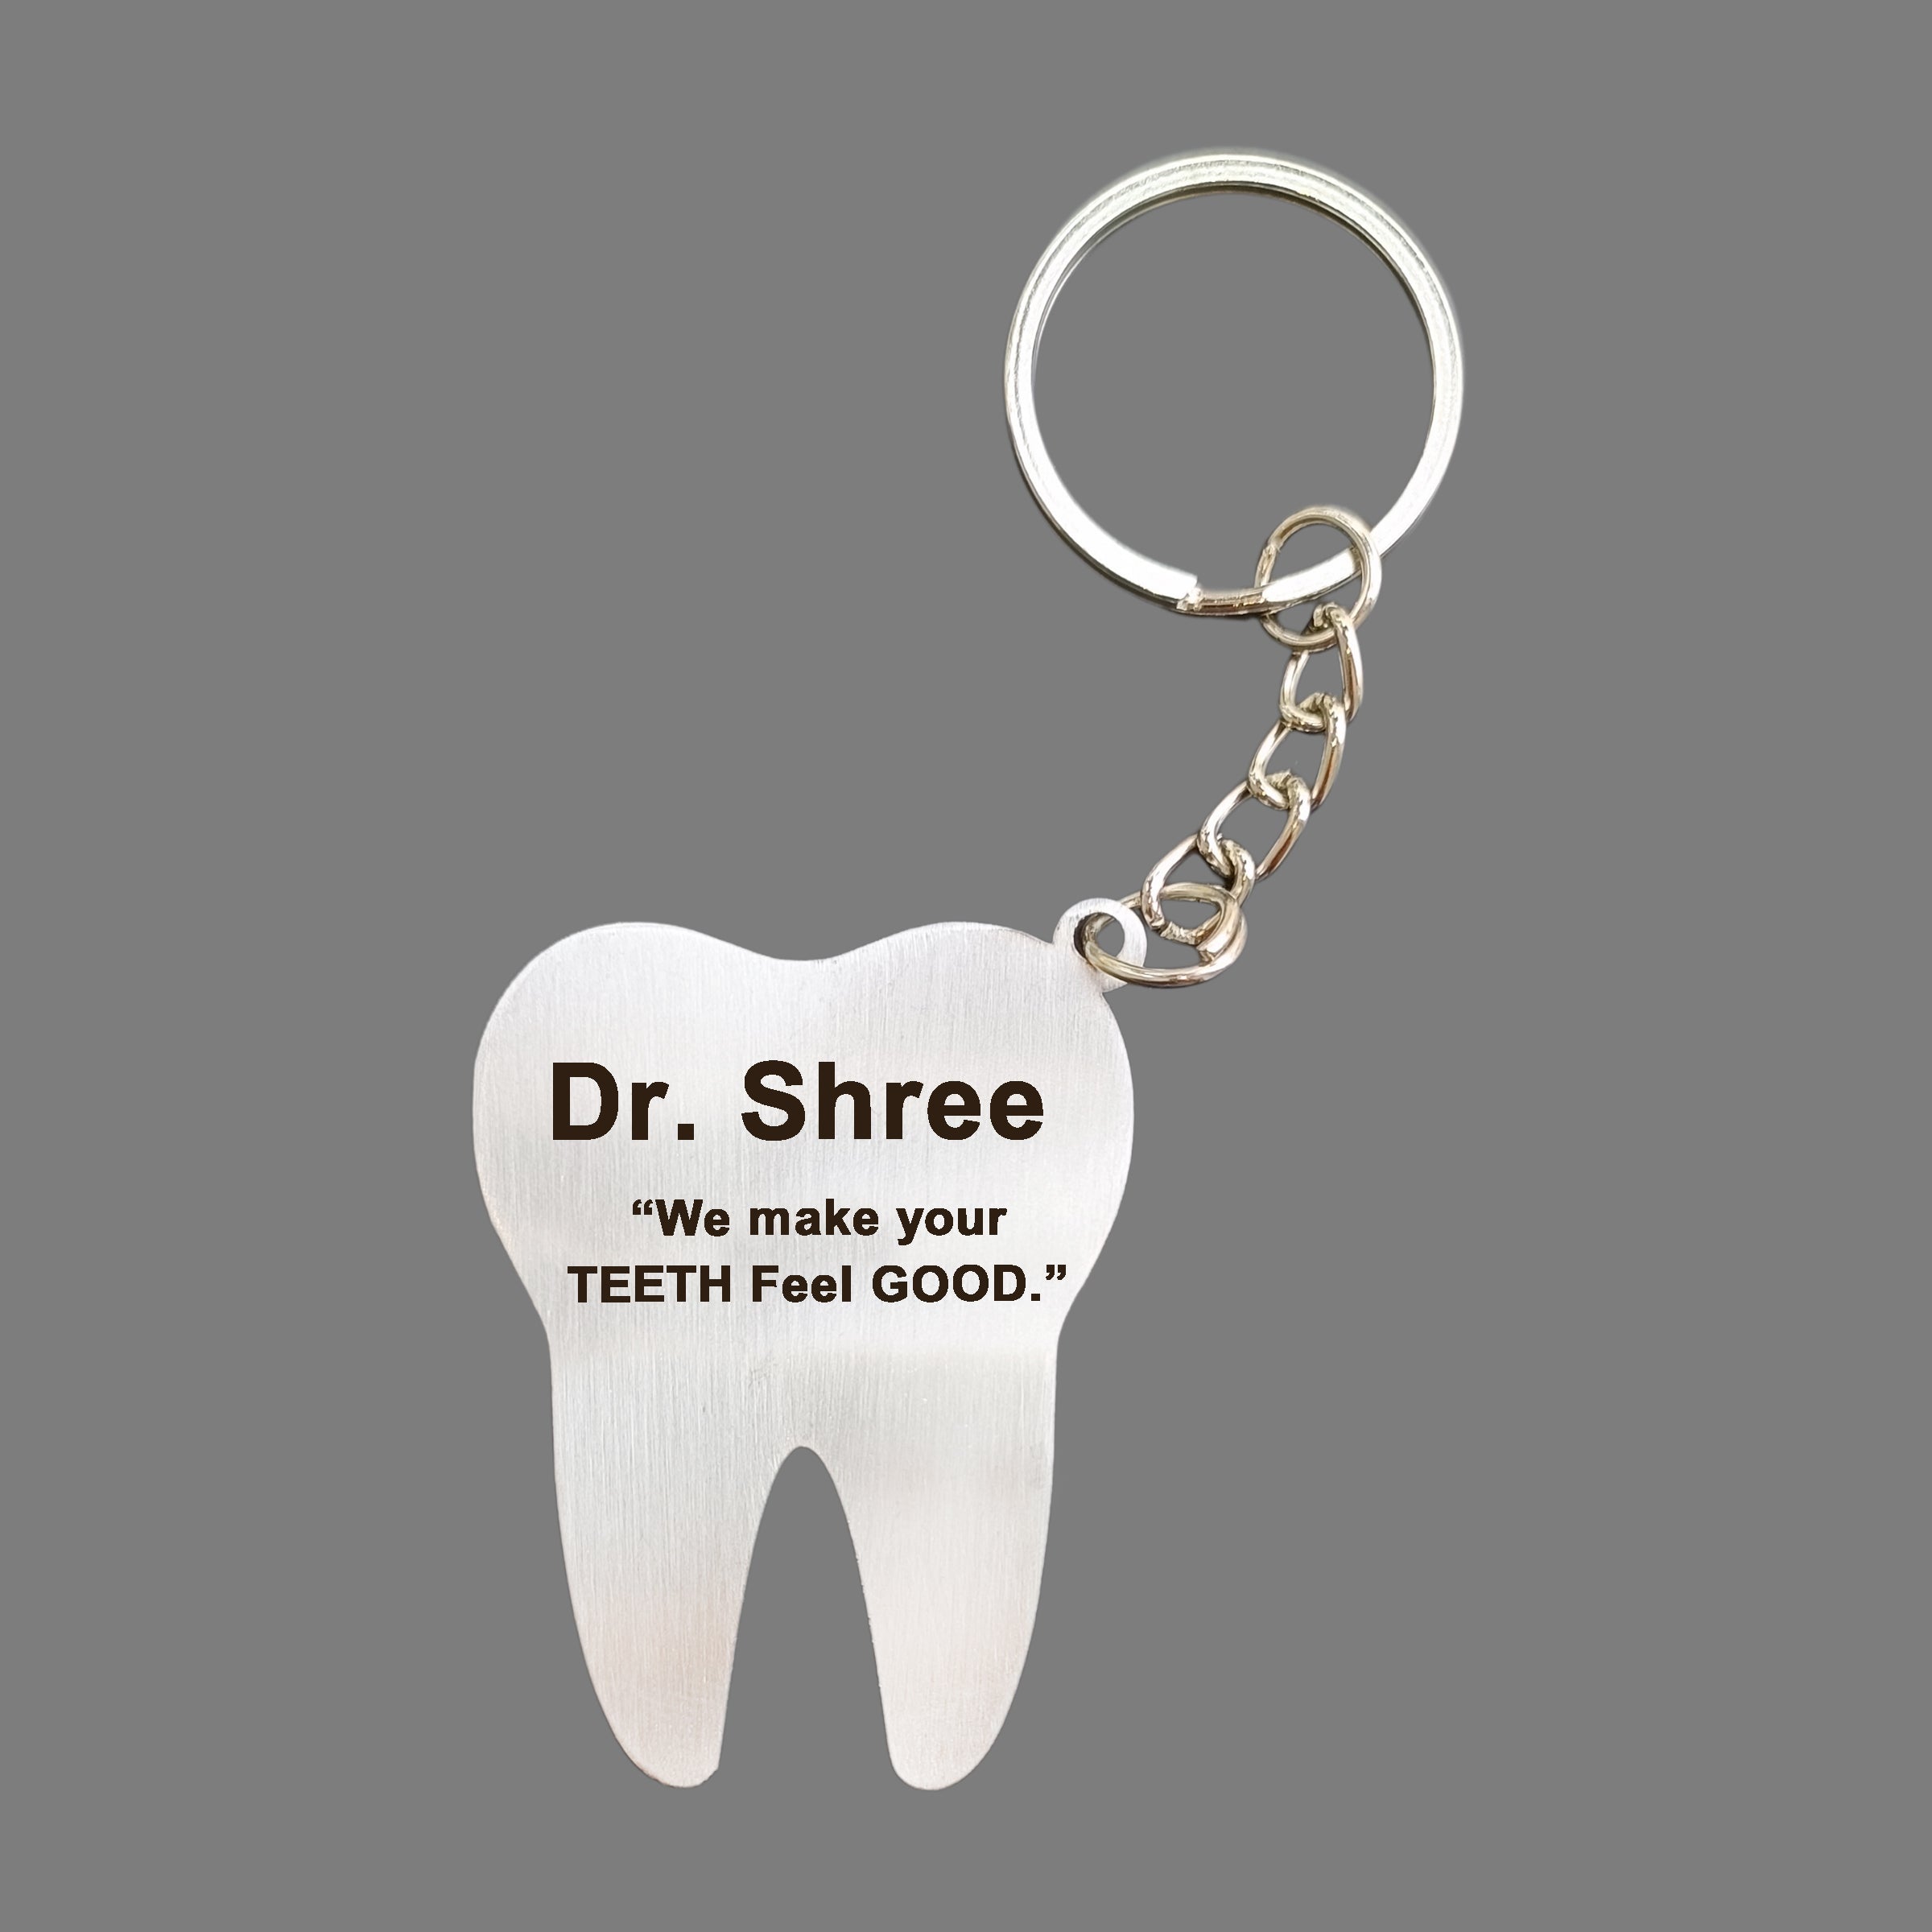 Best Personalized Gifts for Dentists | Dental Gifts for Dentist